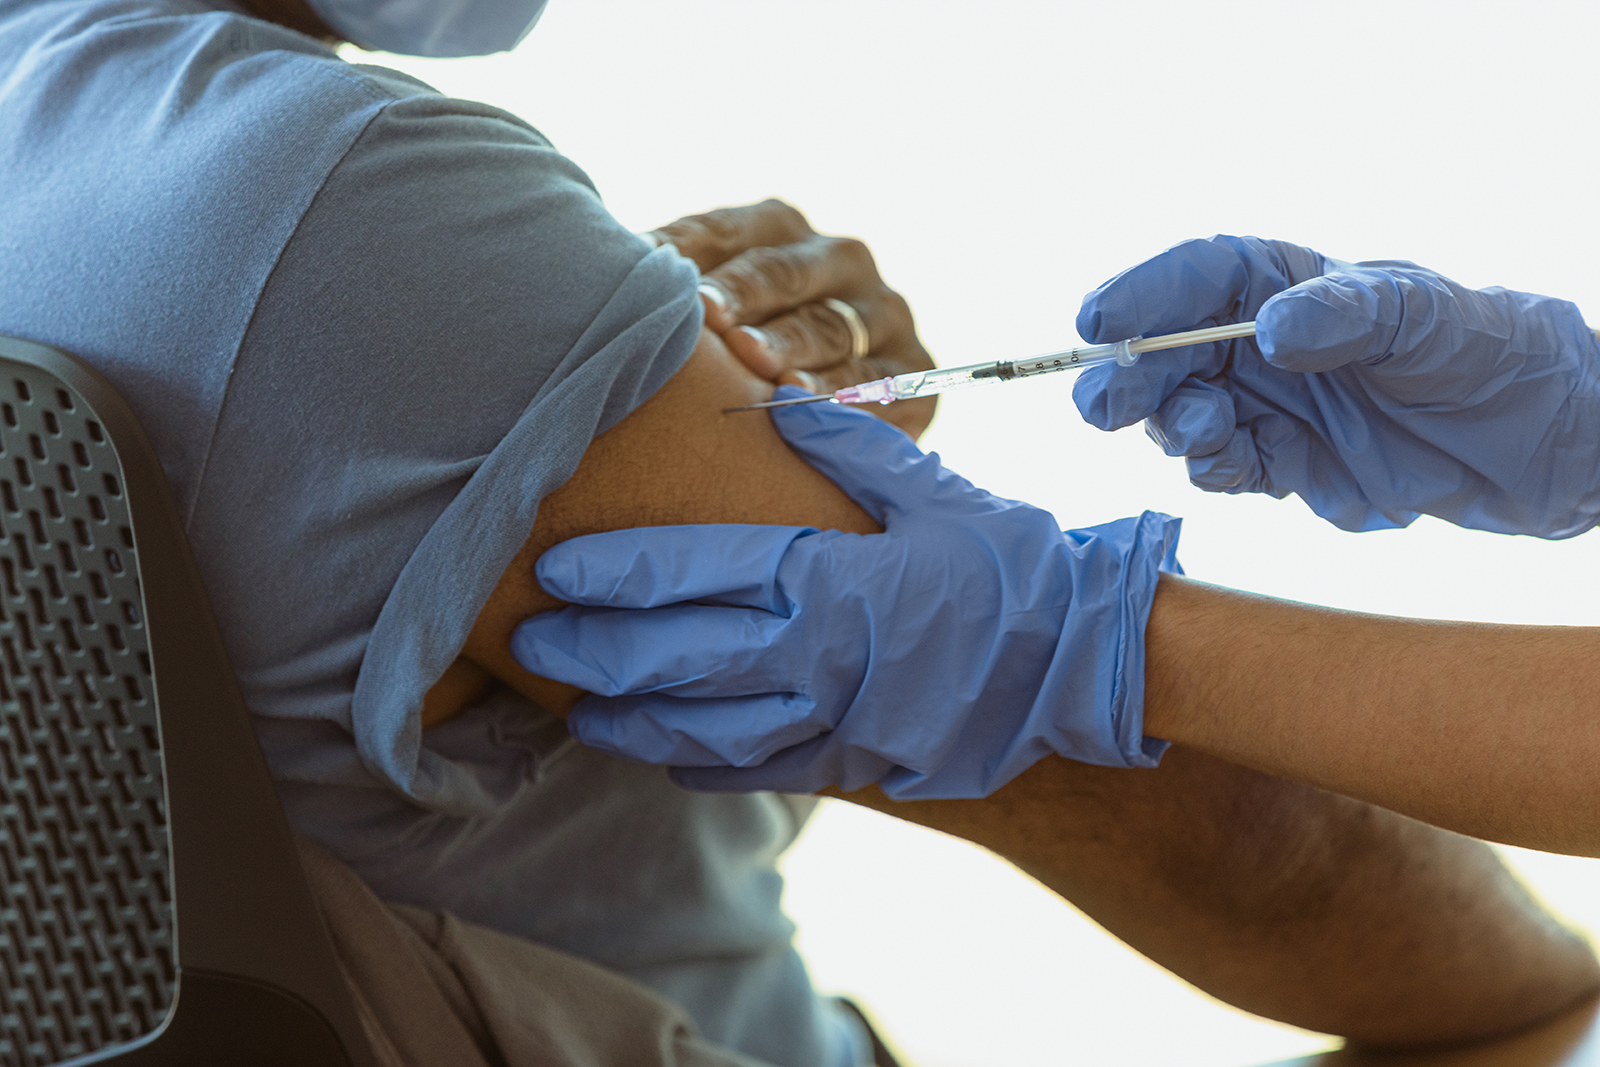 A man holds an arm and watches as a nurse administers a vaccine.